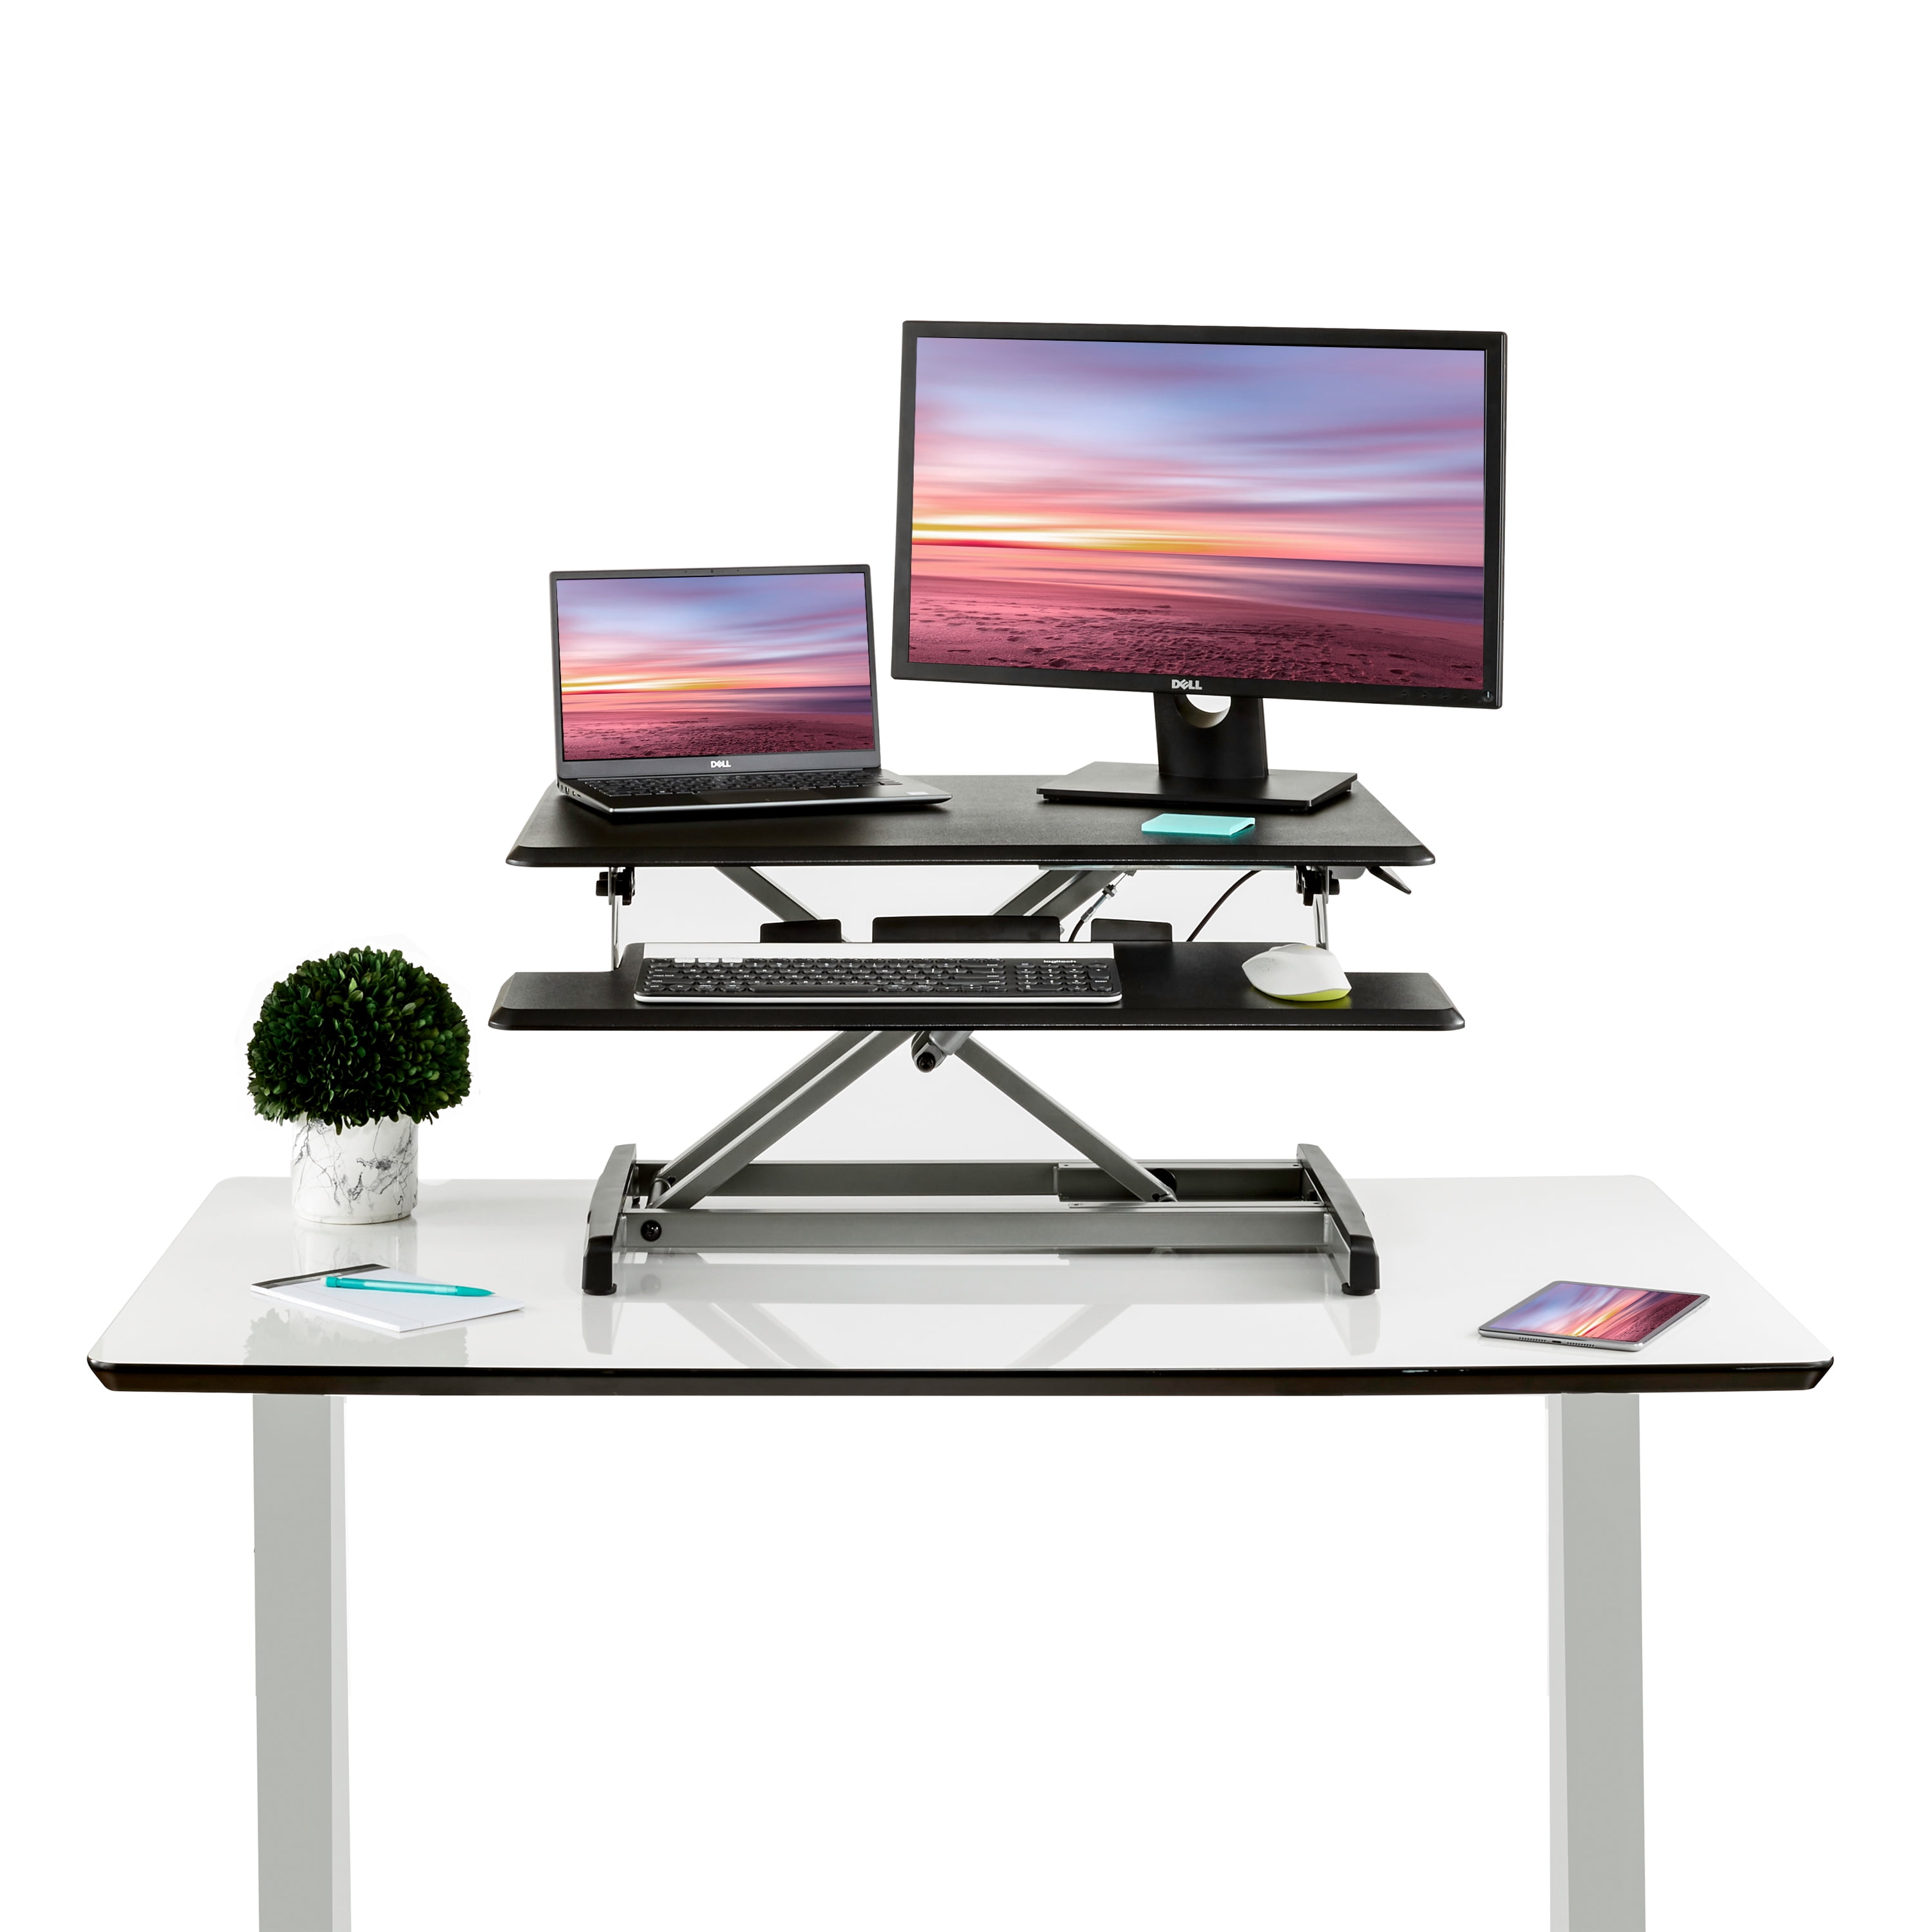 Black Column Seville Classics Airlift 30 Compact Gas-Spring Pedestal Height Adjustable Desk with Sliding Keyboard Tray Ergonomic Table 